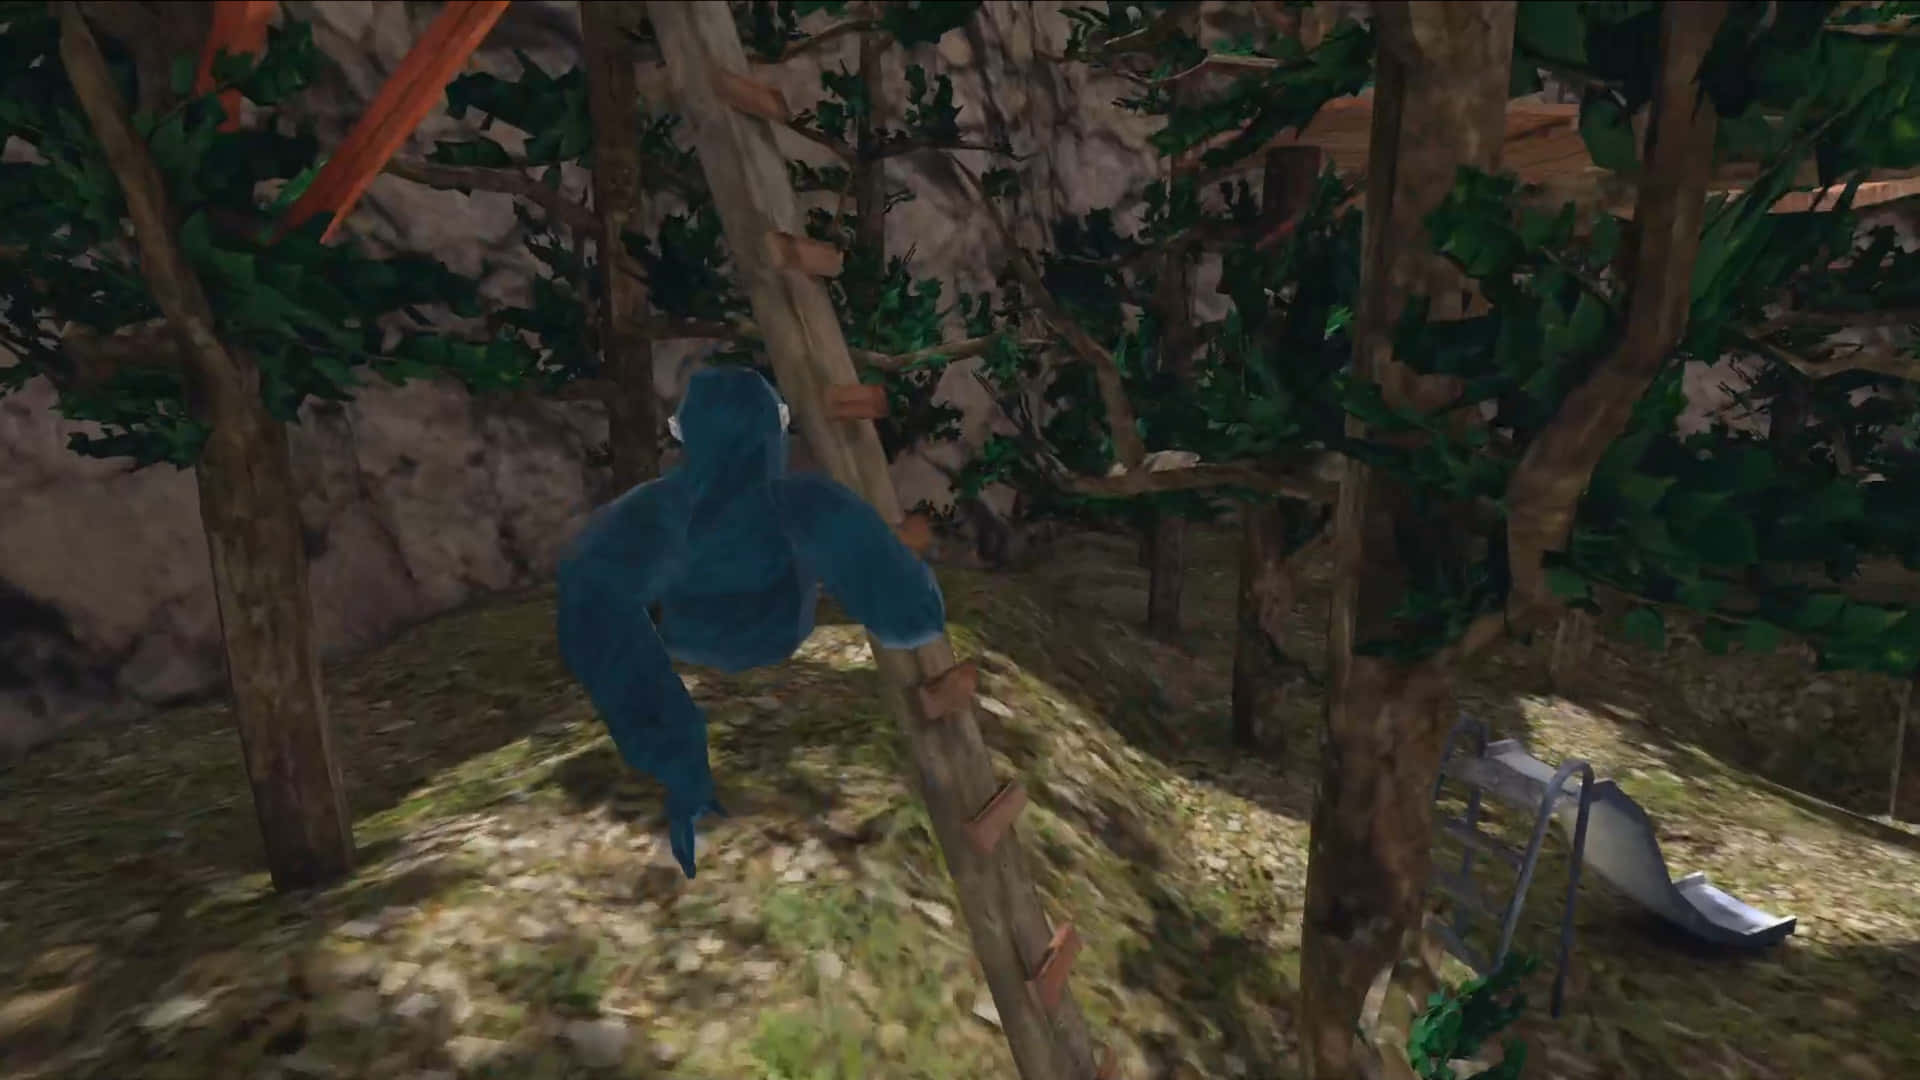 A Blue Monkey Is Climbing A Tree In A Video Game Wallpaper